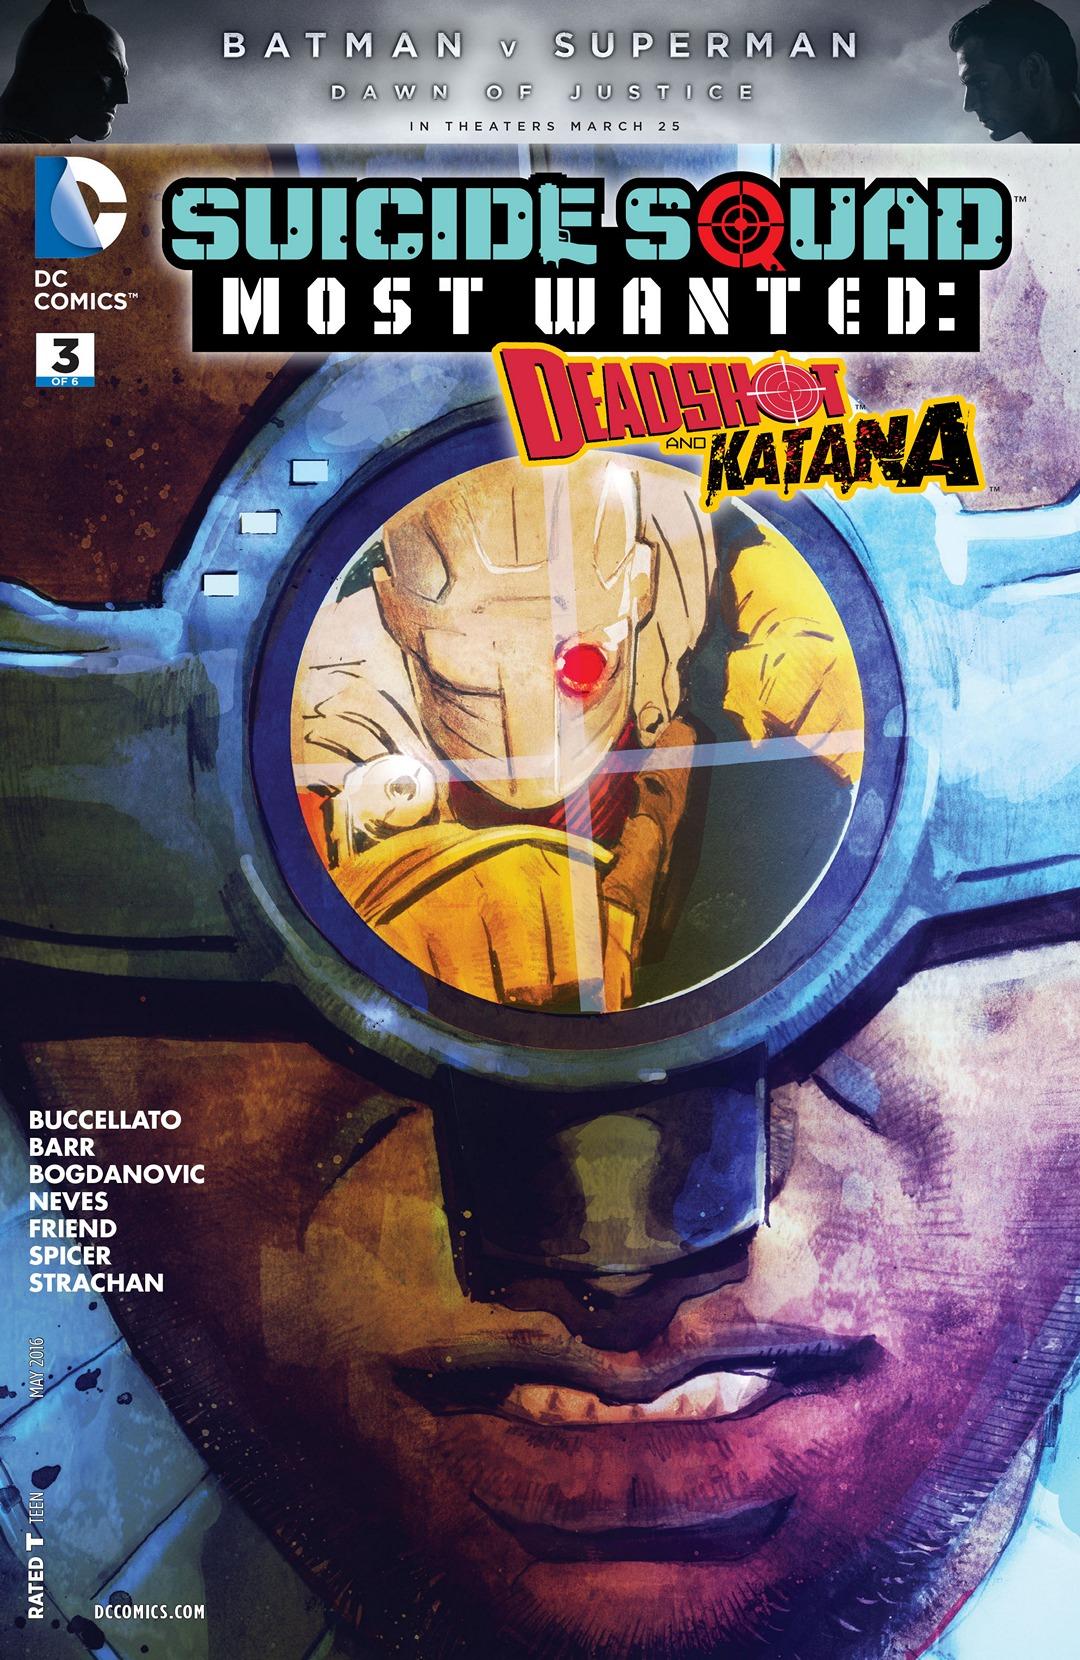 Suicide Squad Most Wanted: Deadshot and Katana Vol. 1 #3